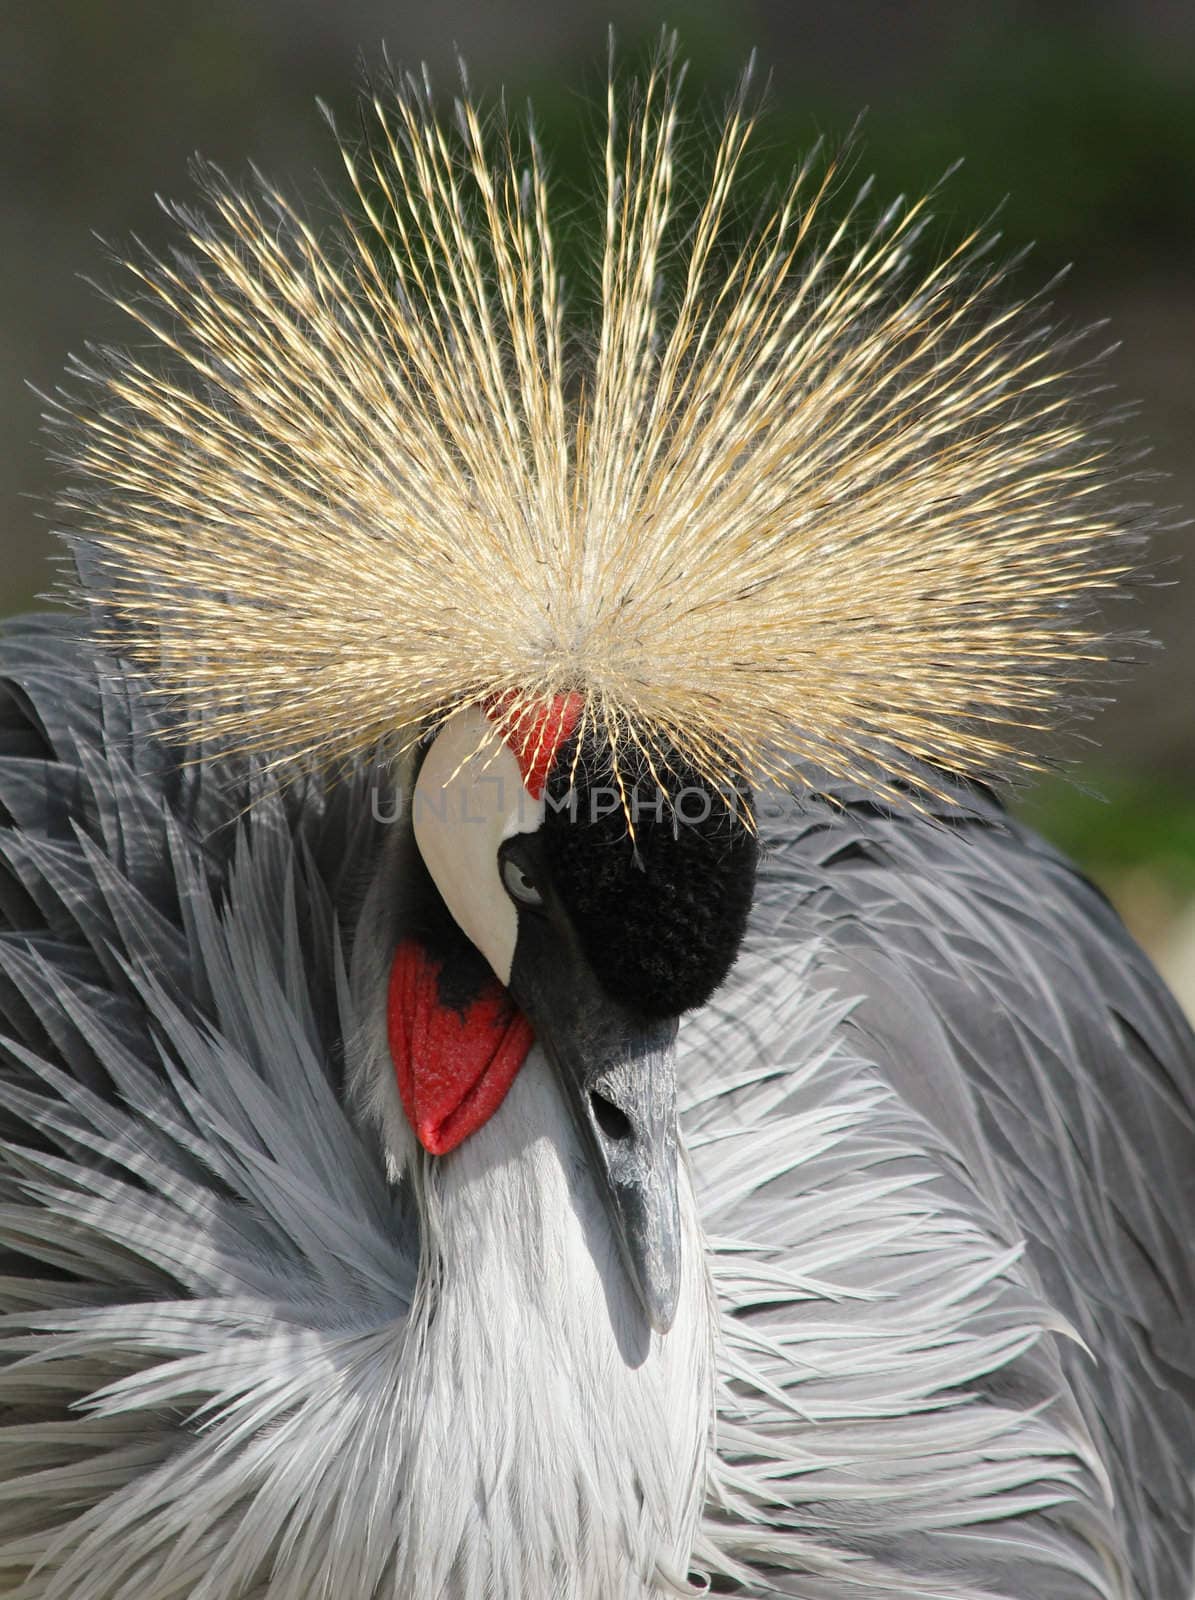 crowned crane near diadem from the image